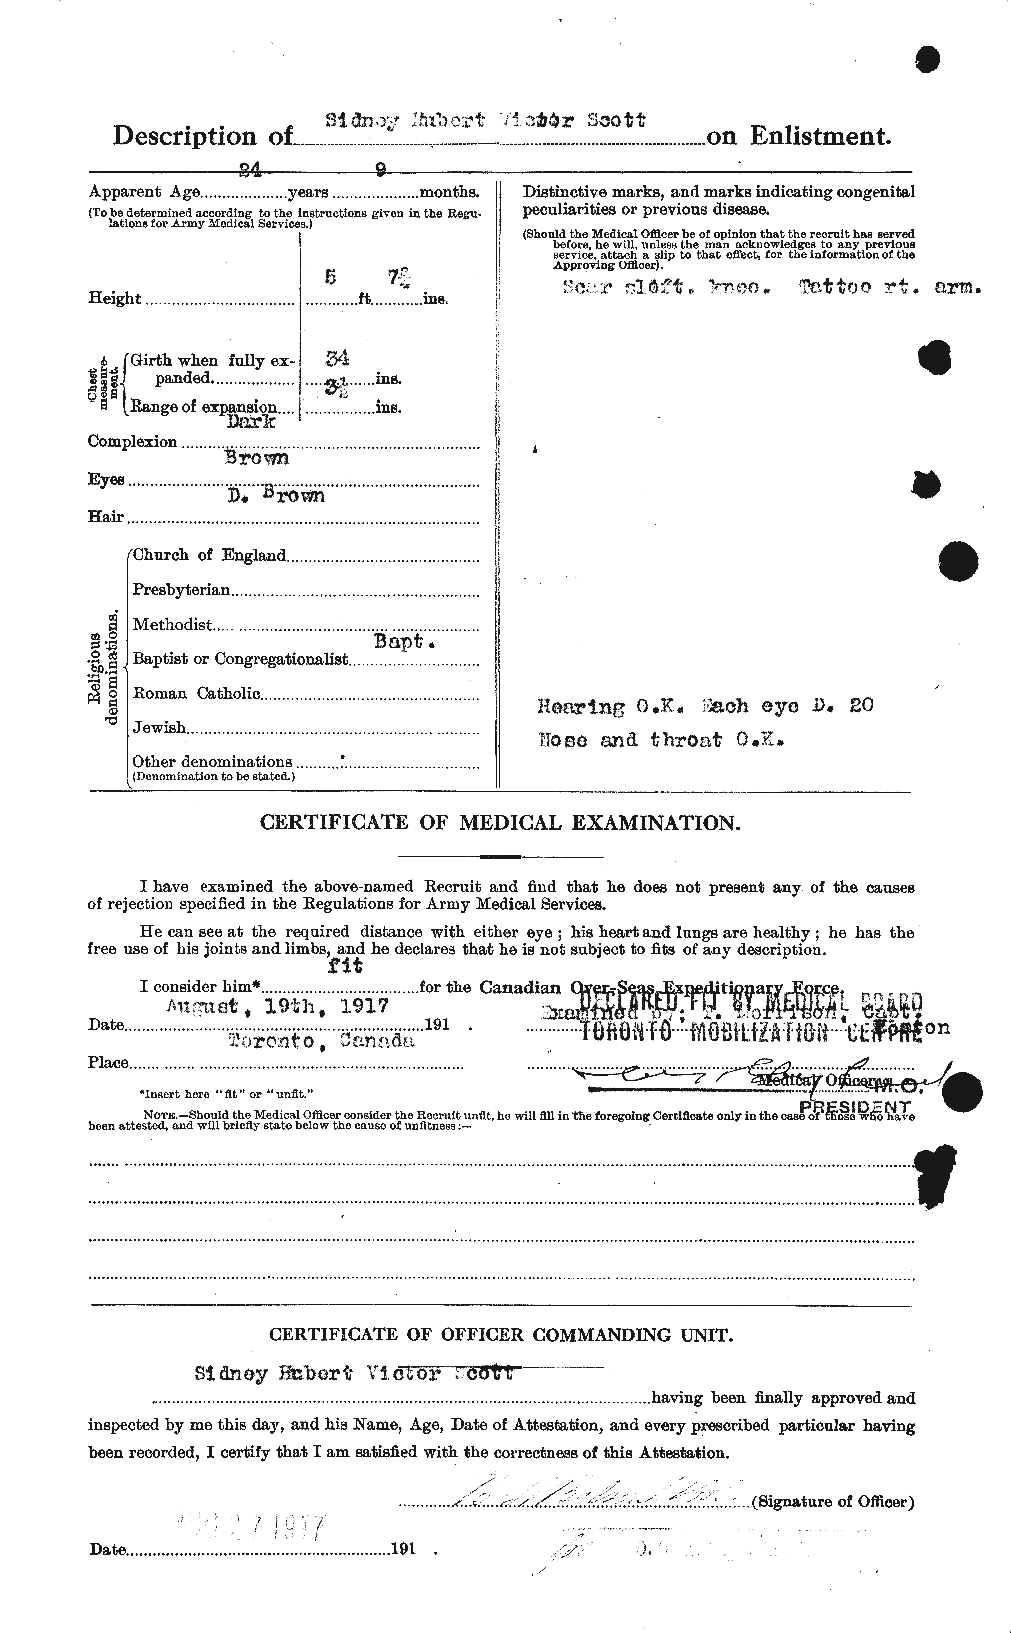 Personnel Records of the First World War - CEF 088846b